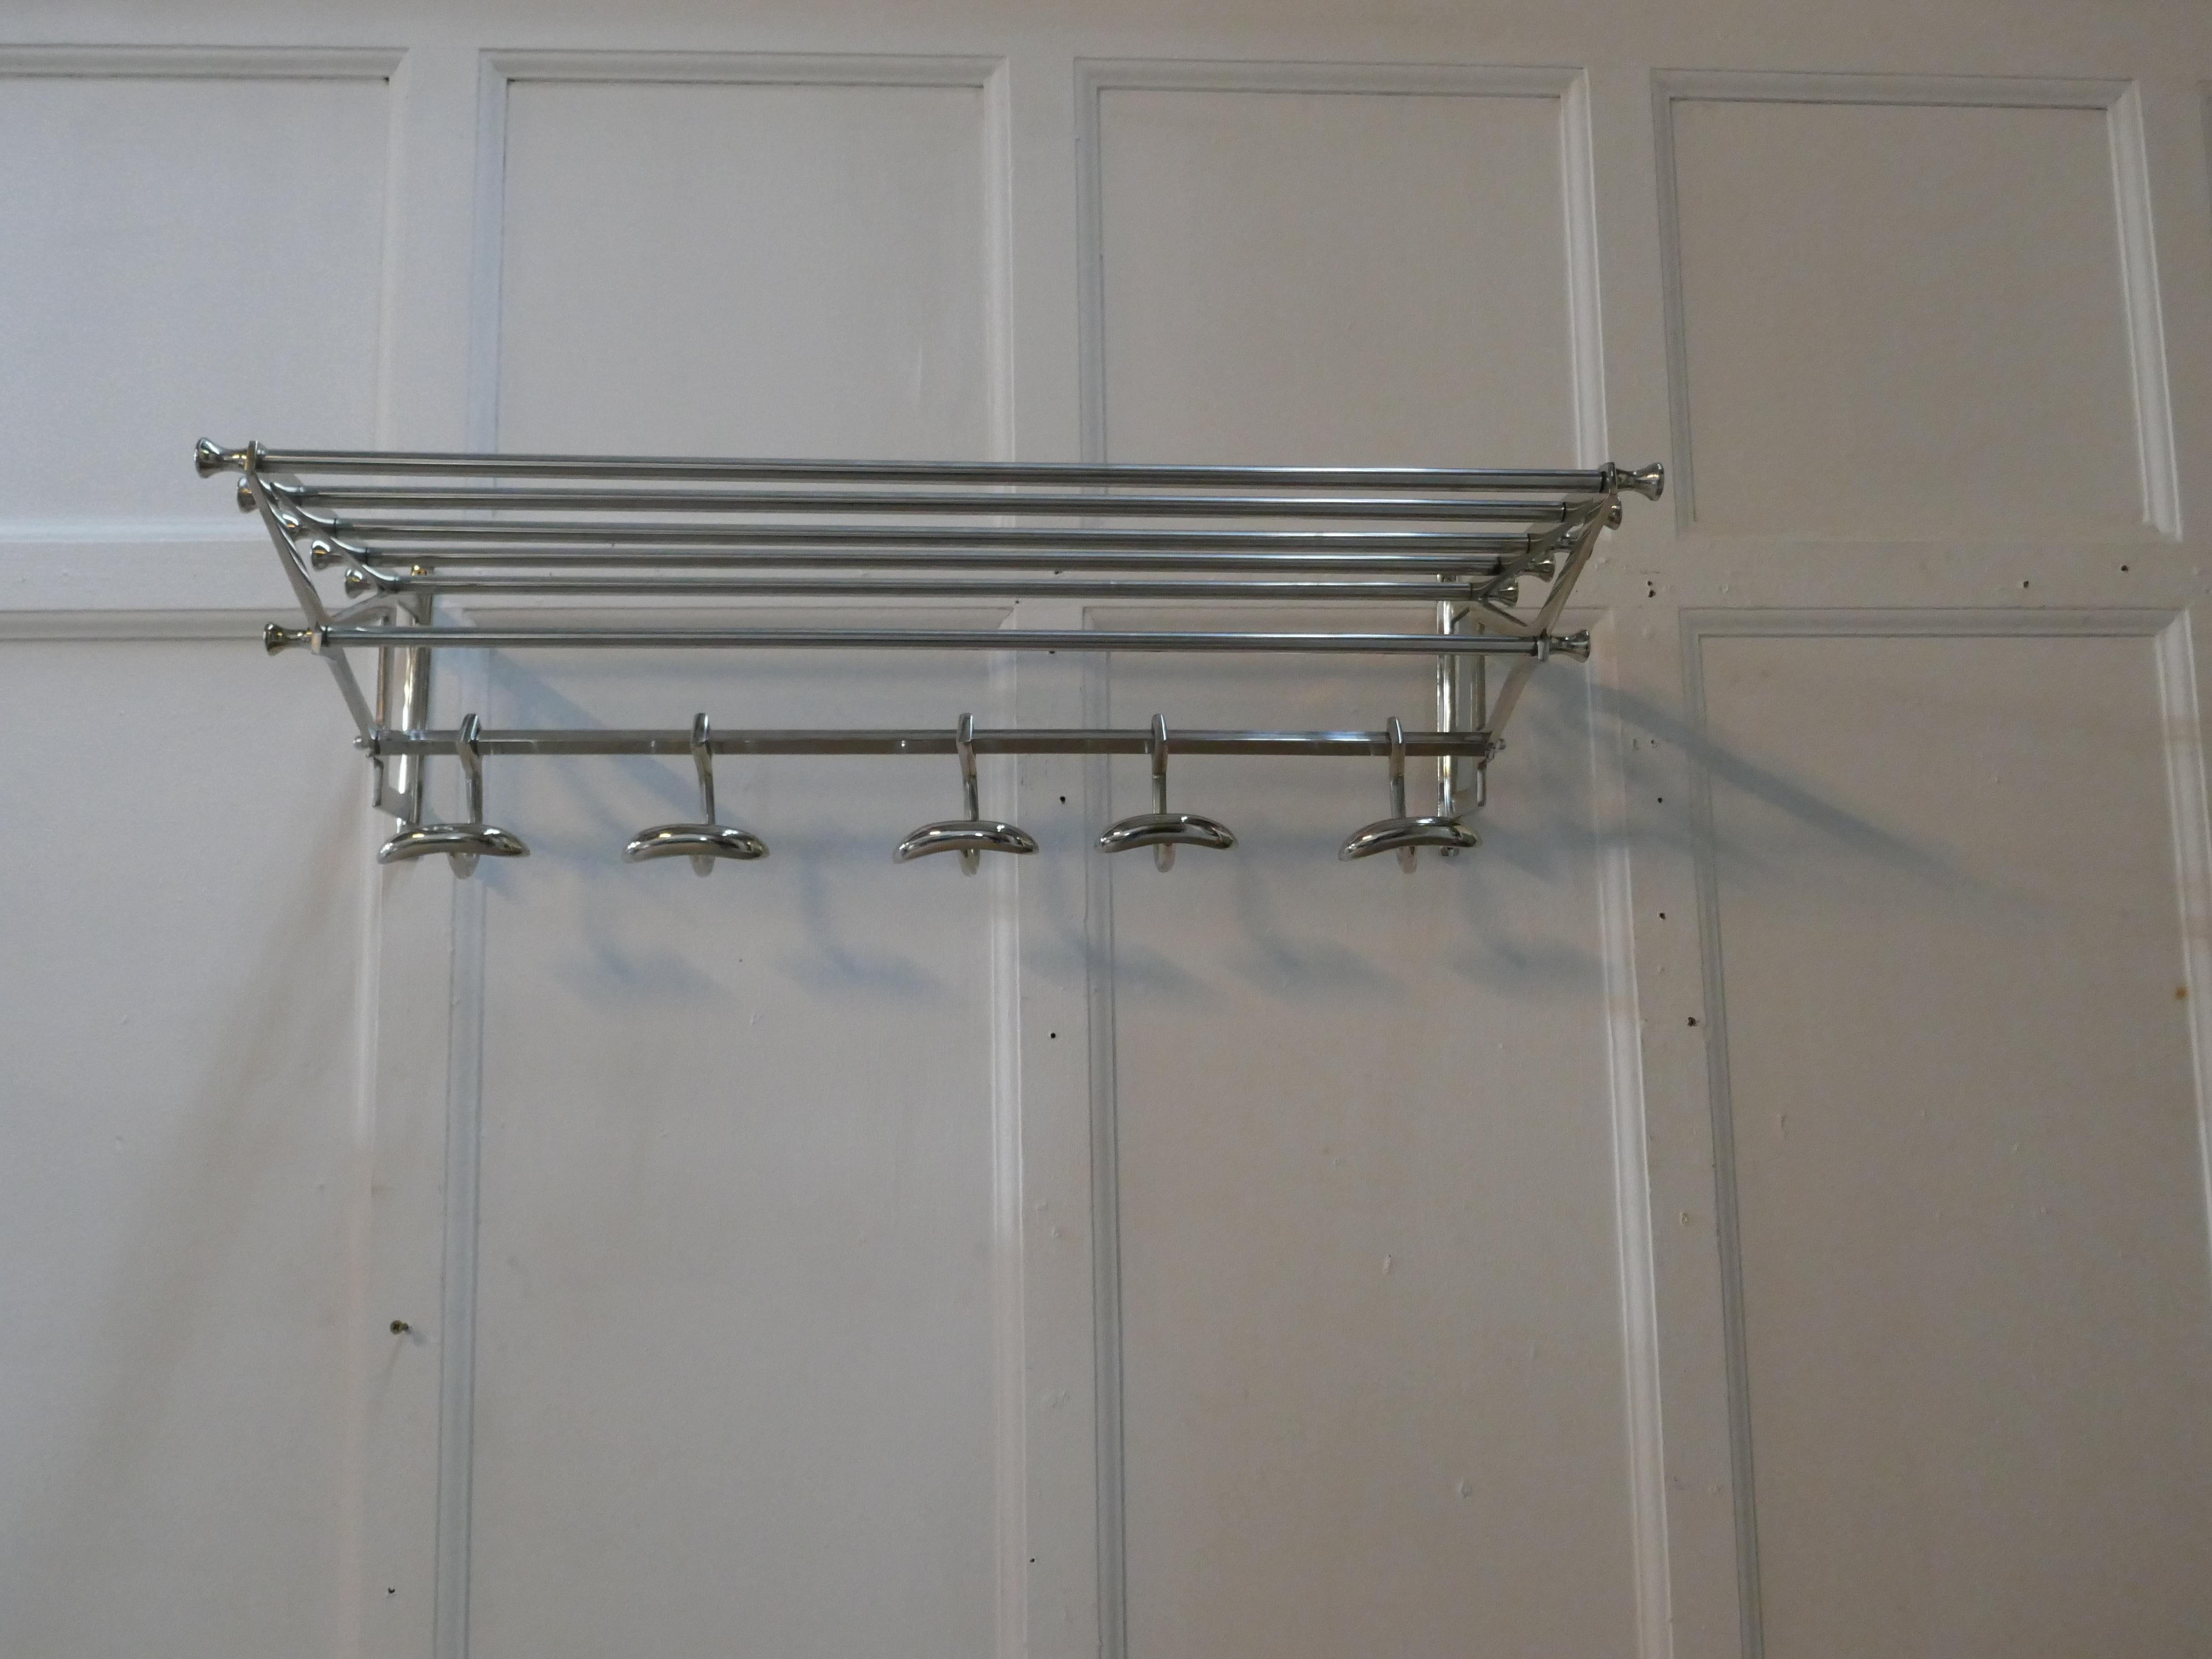 20th Century French Art Deco Style Hat and Coat Rack, Pullman Railway Train Style